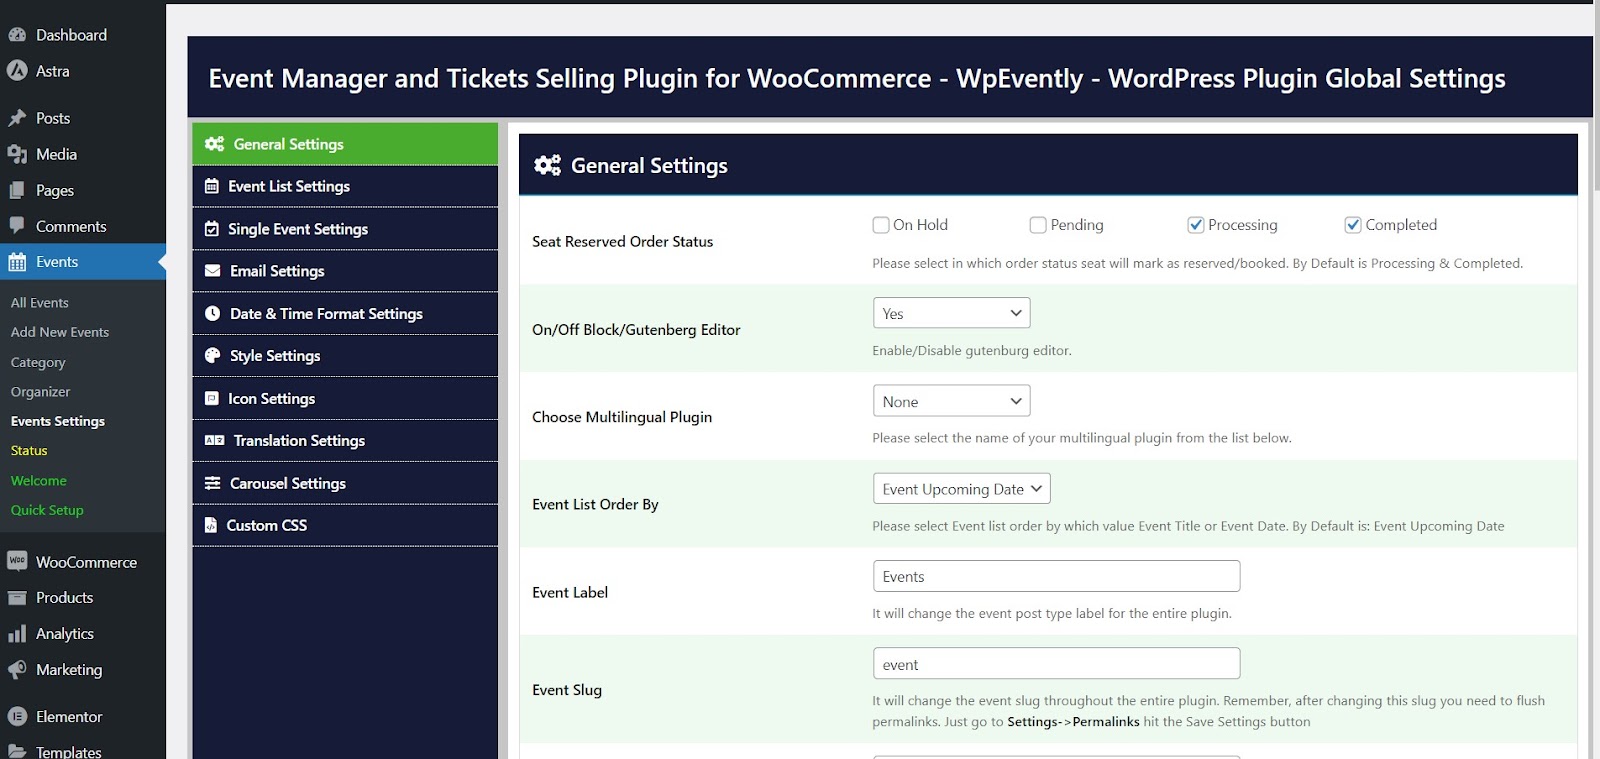 How to Use WooCommerce for Event Registration 38